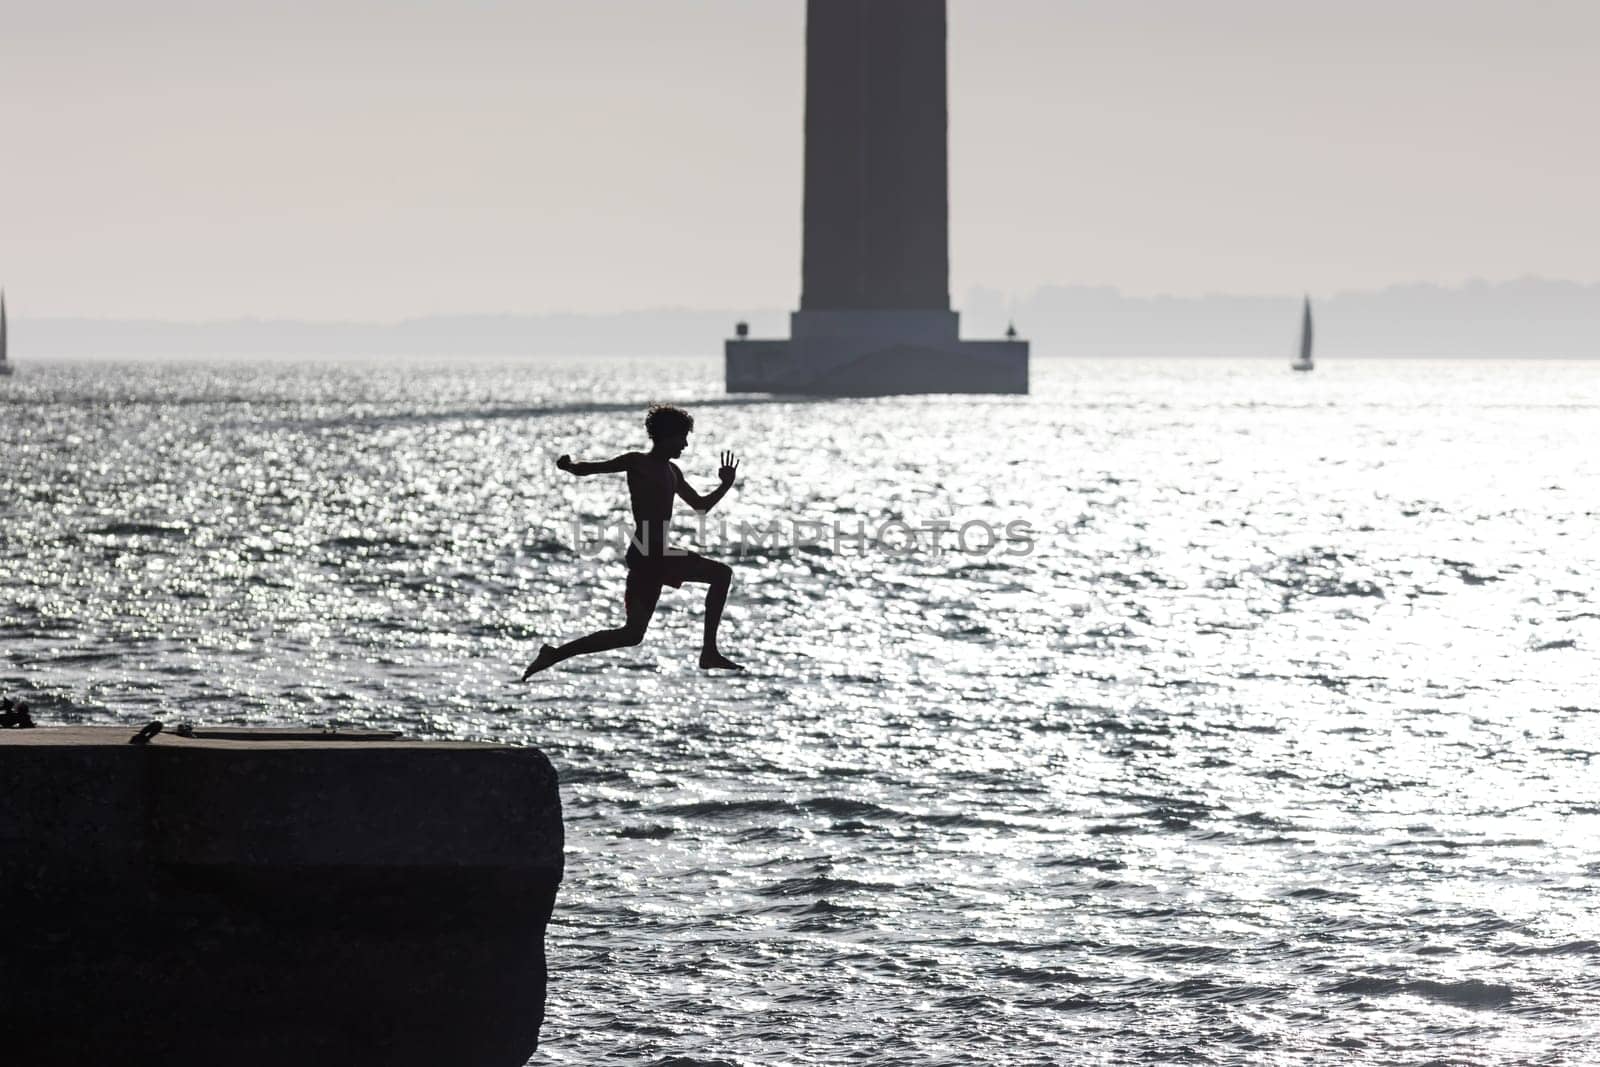 A boy jumps into the water with a takeoff run - monochrome image. Mid shot